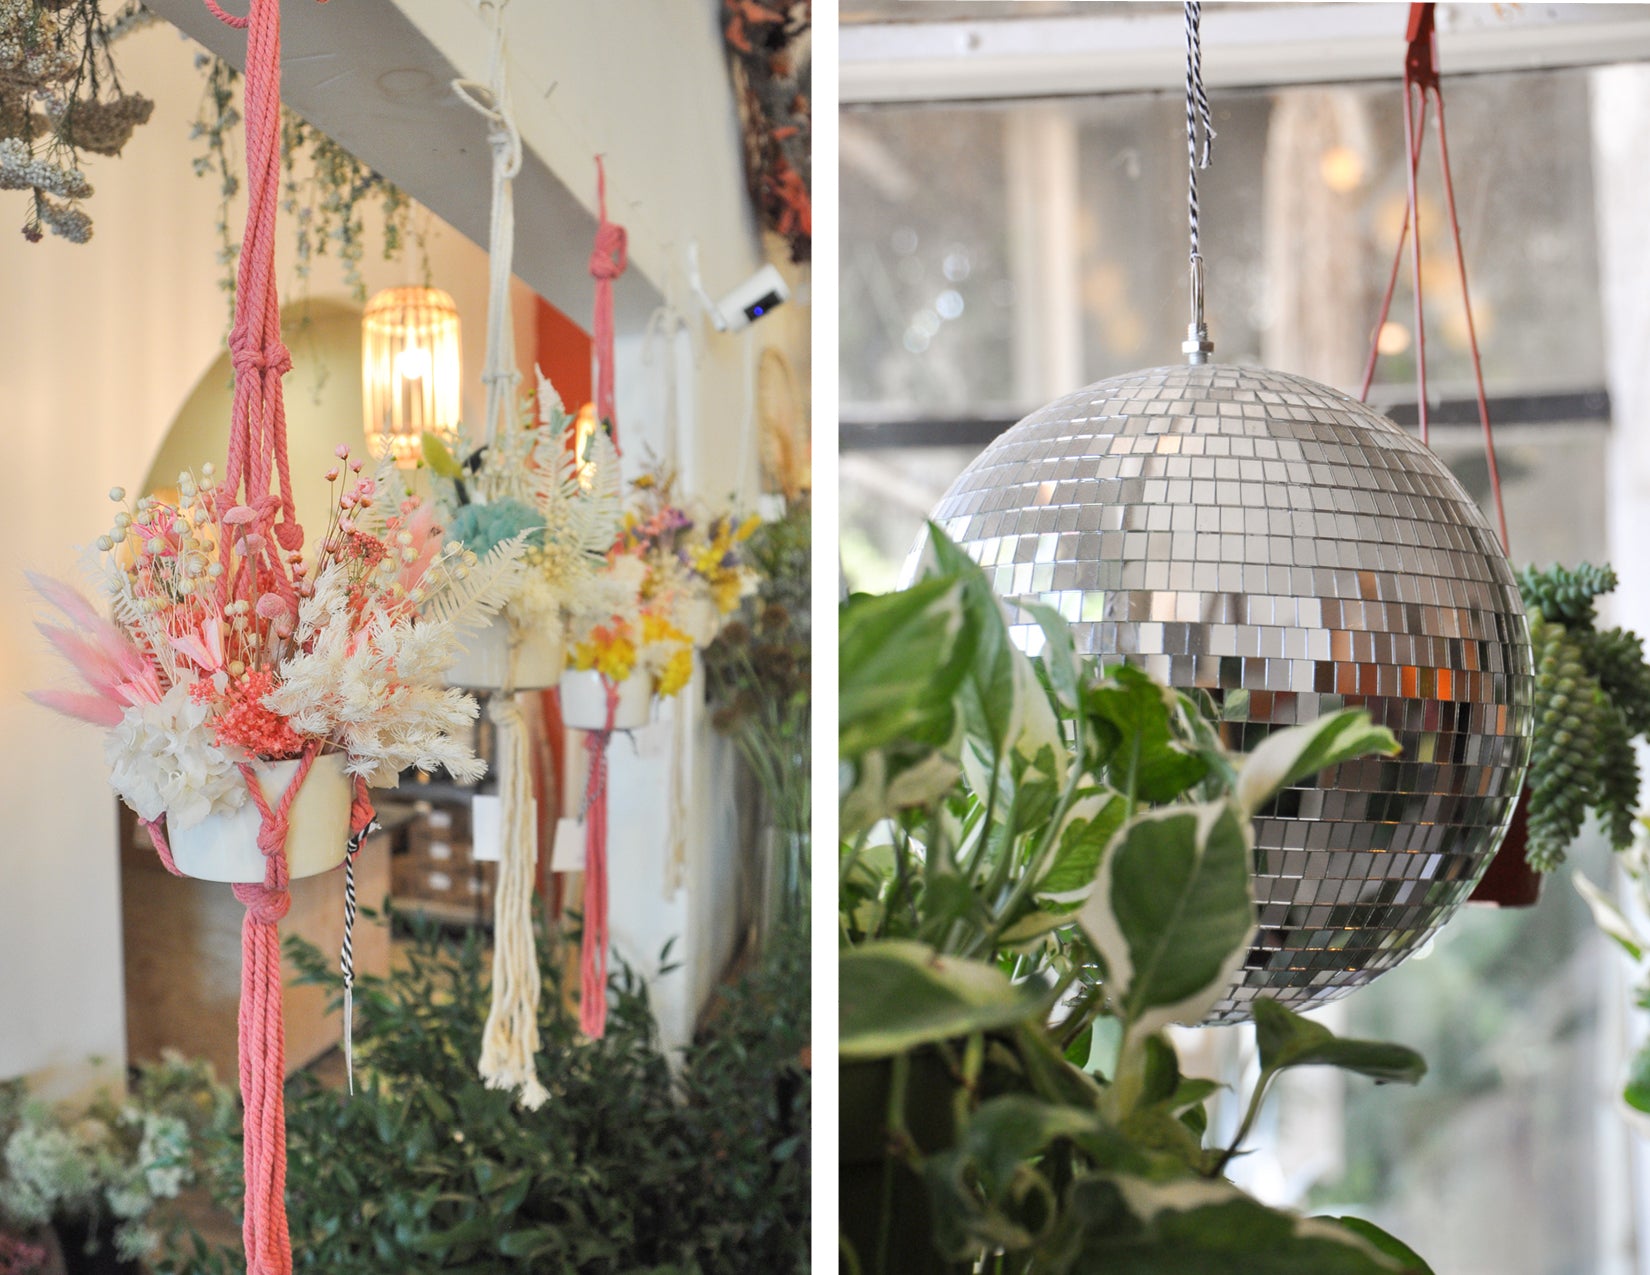 WildFlora mother's day flower alternatives gift present ideas disco ball dried flower floral hanging suspended macrame